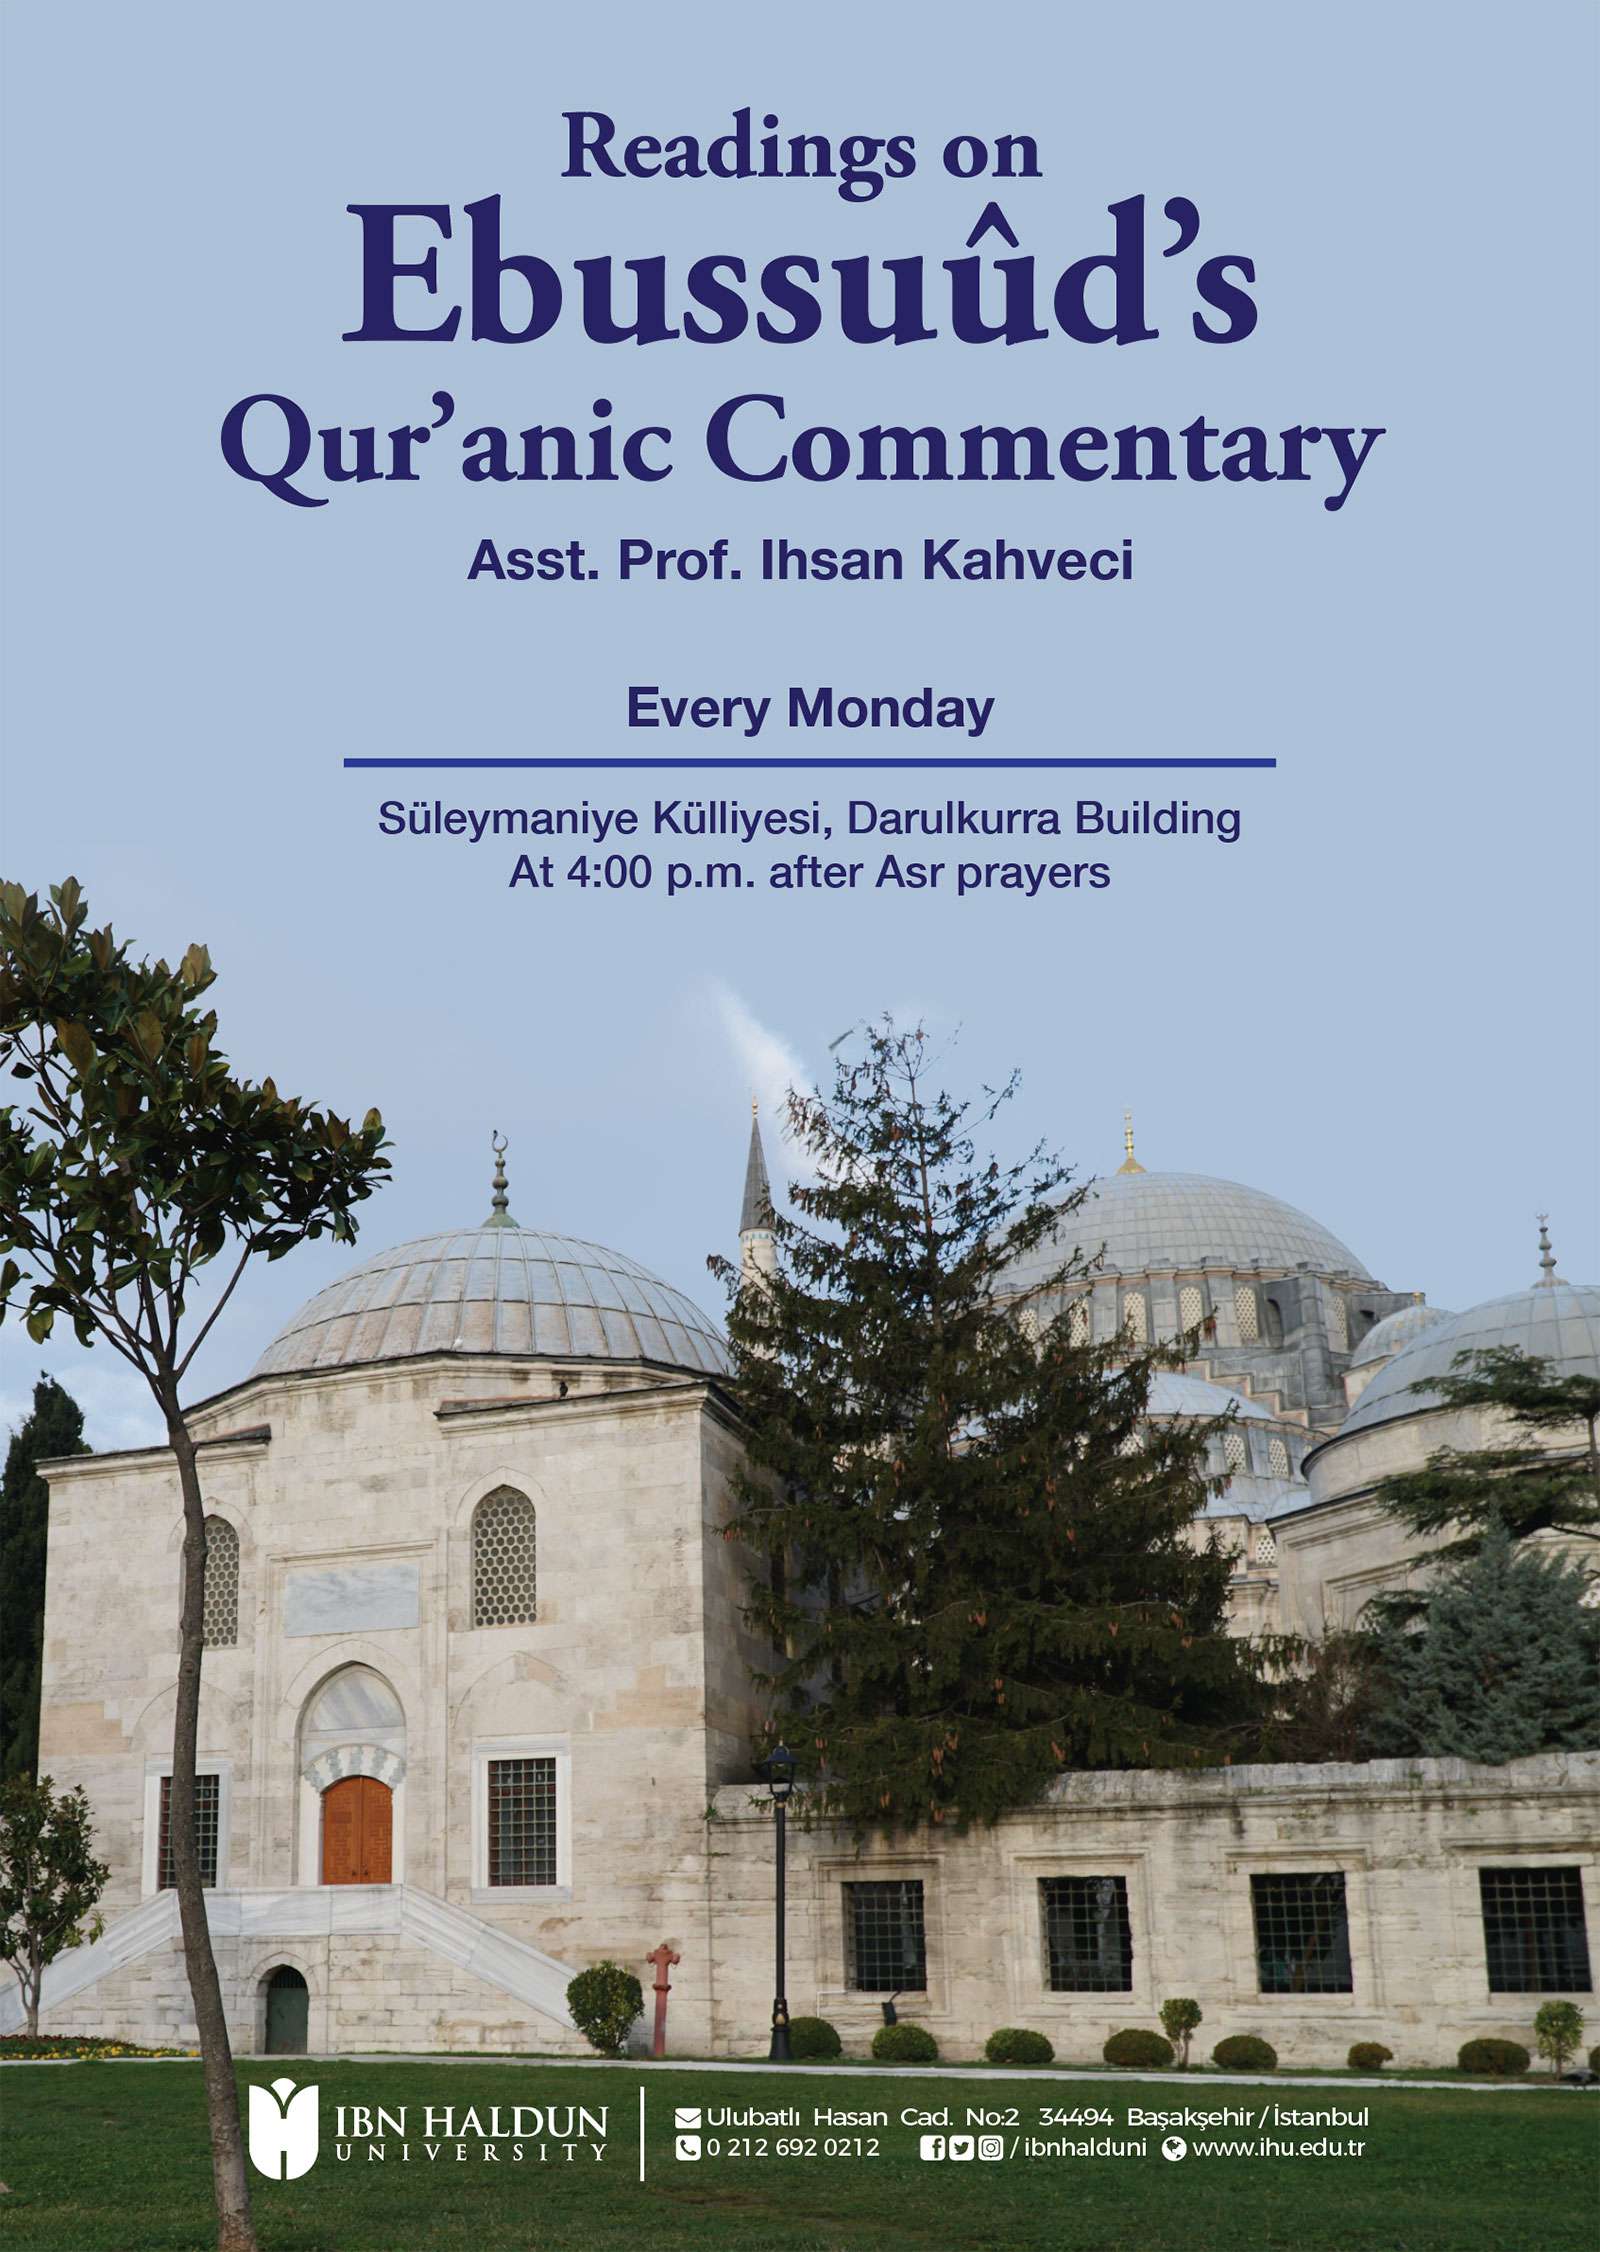 Readings on Ebussuud’s Qur’anic Commentary